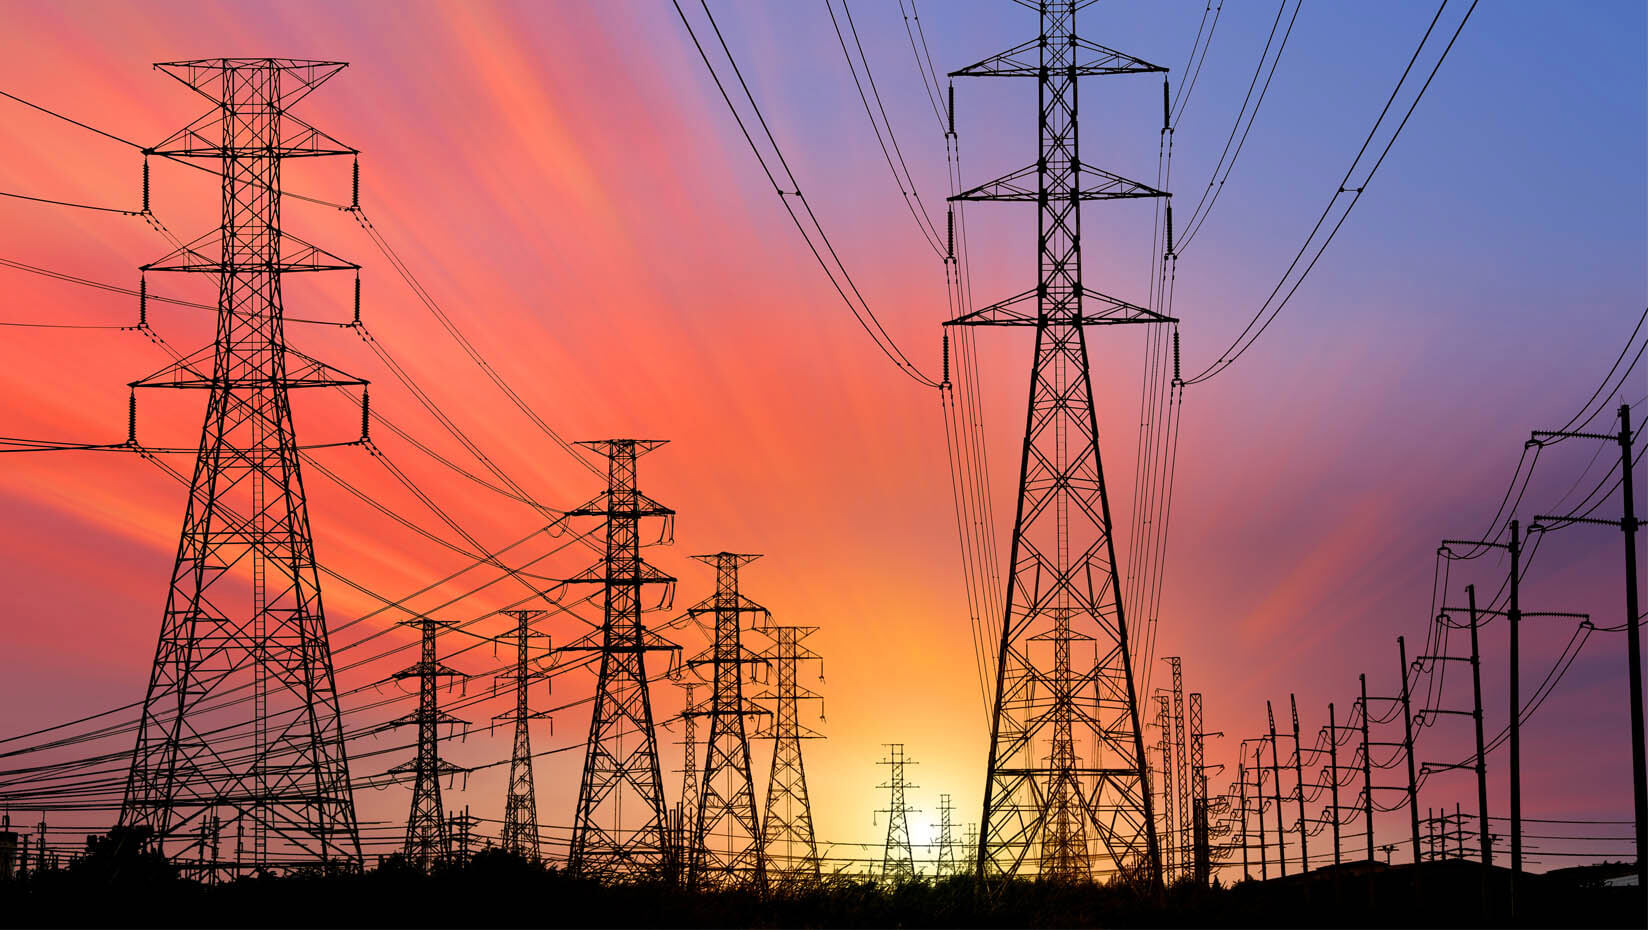 A photo of an electrical grid at sunset